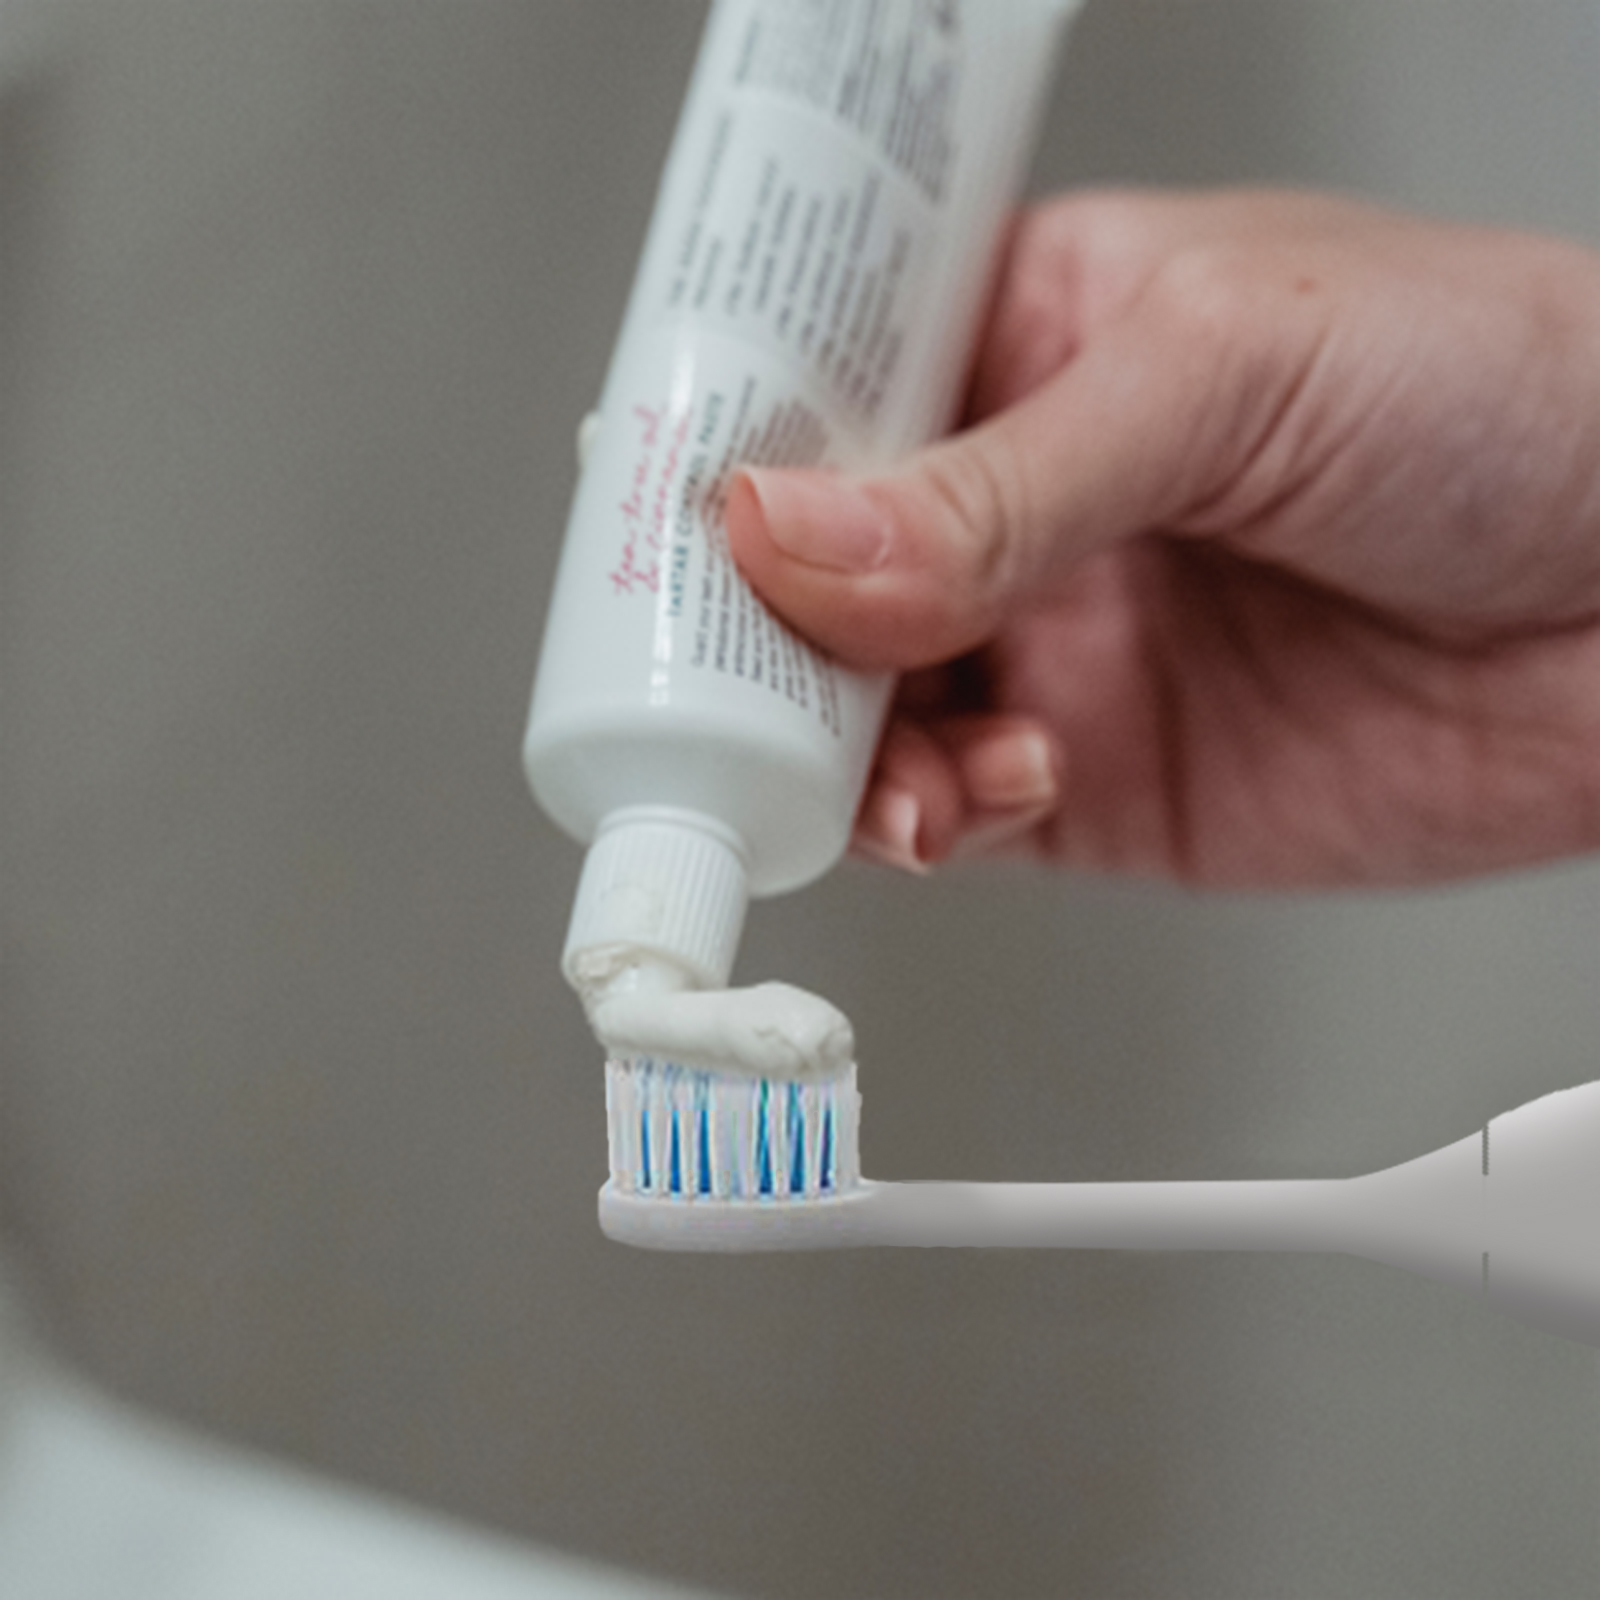 How to Use Electric Toothbrush Step4